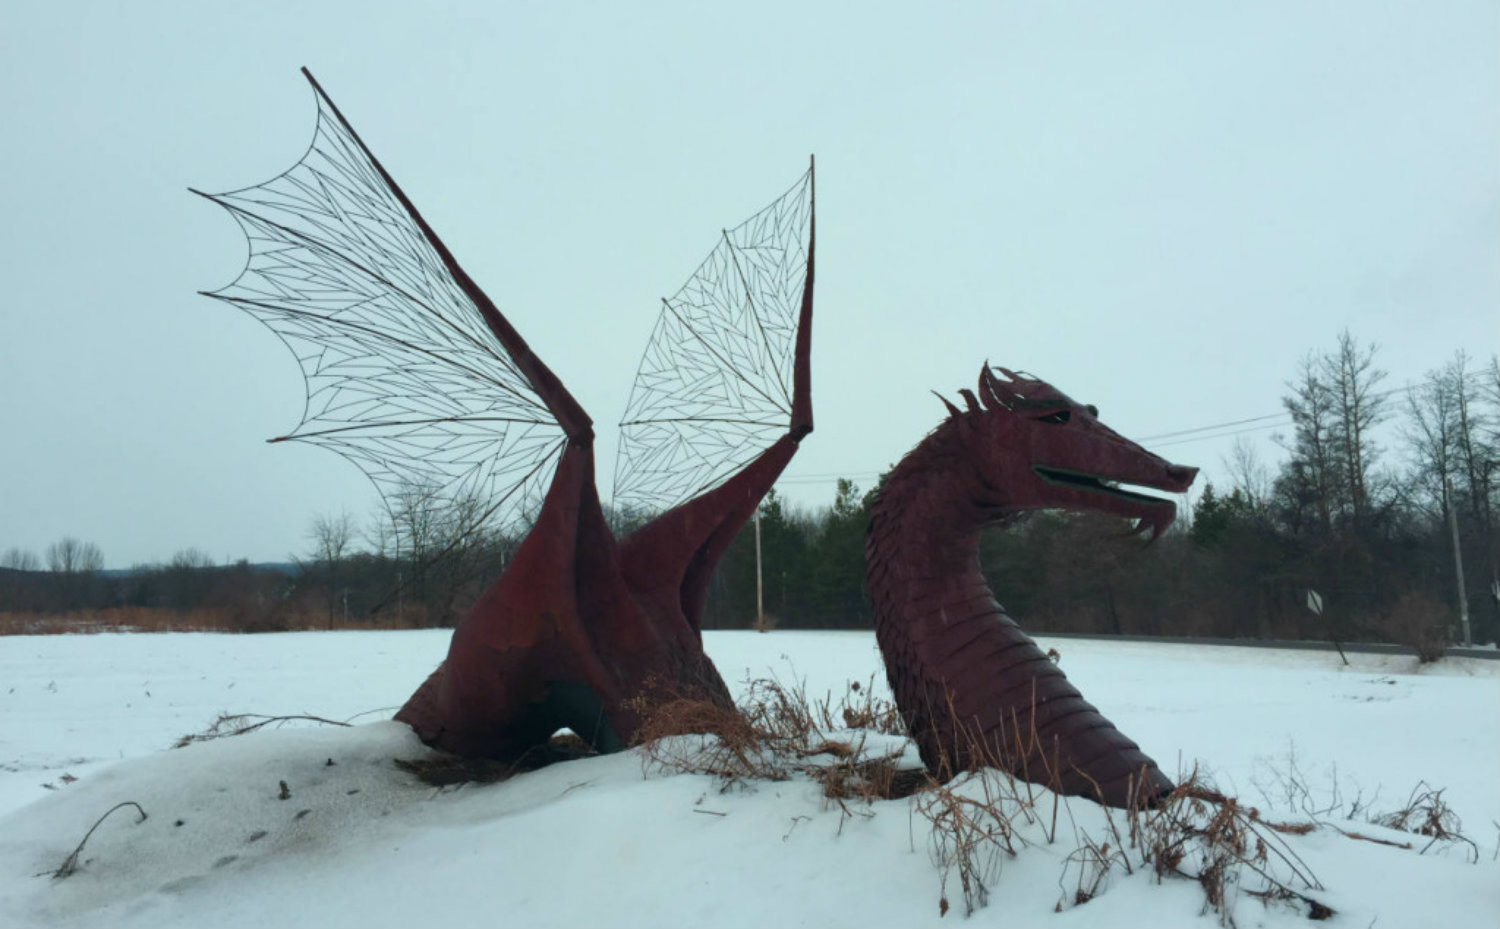 Dragon Sculpture in East Bethany, NY - Featured Image